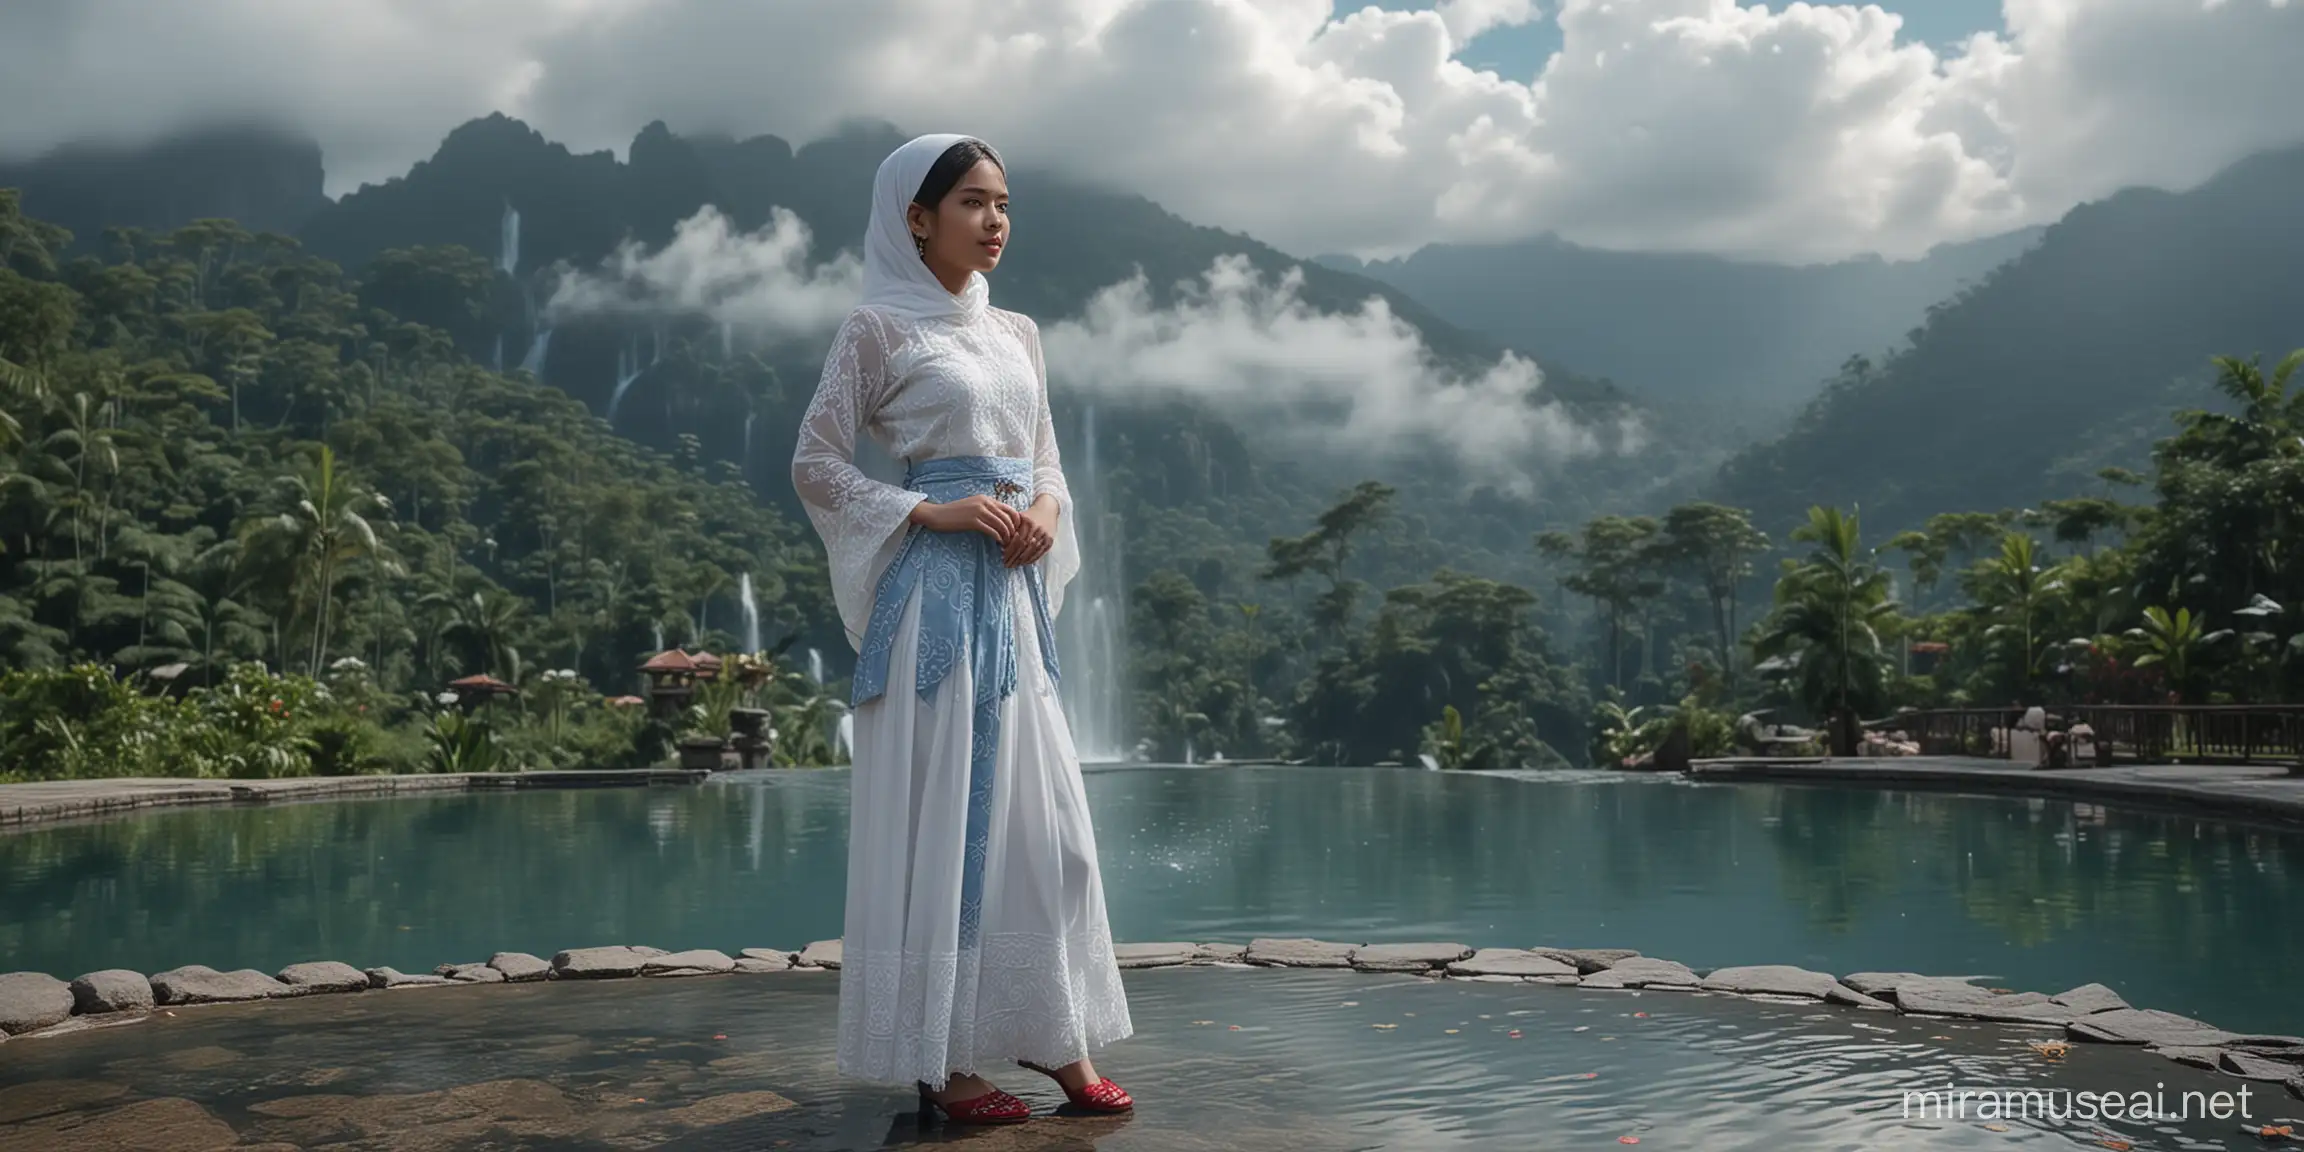 Indonesian Teenage Girl in Traditional Kebaya at Mountain Fountain Amidst Clouds